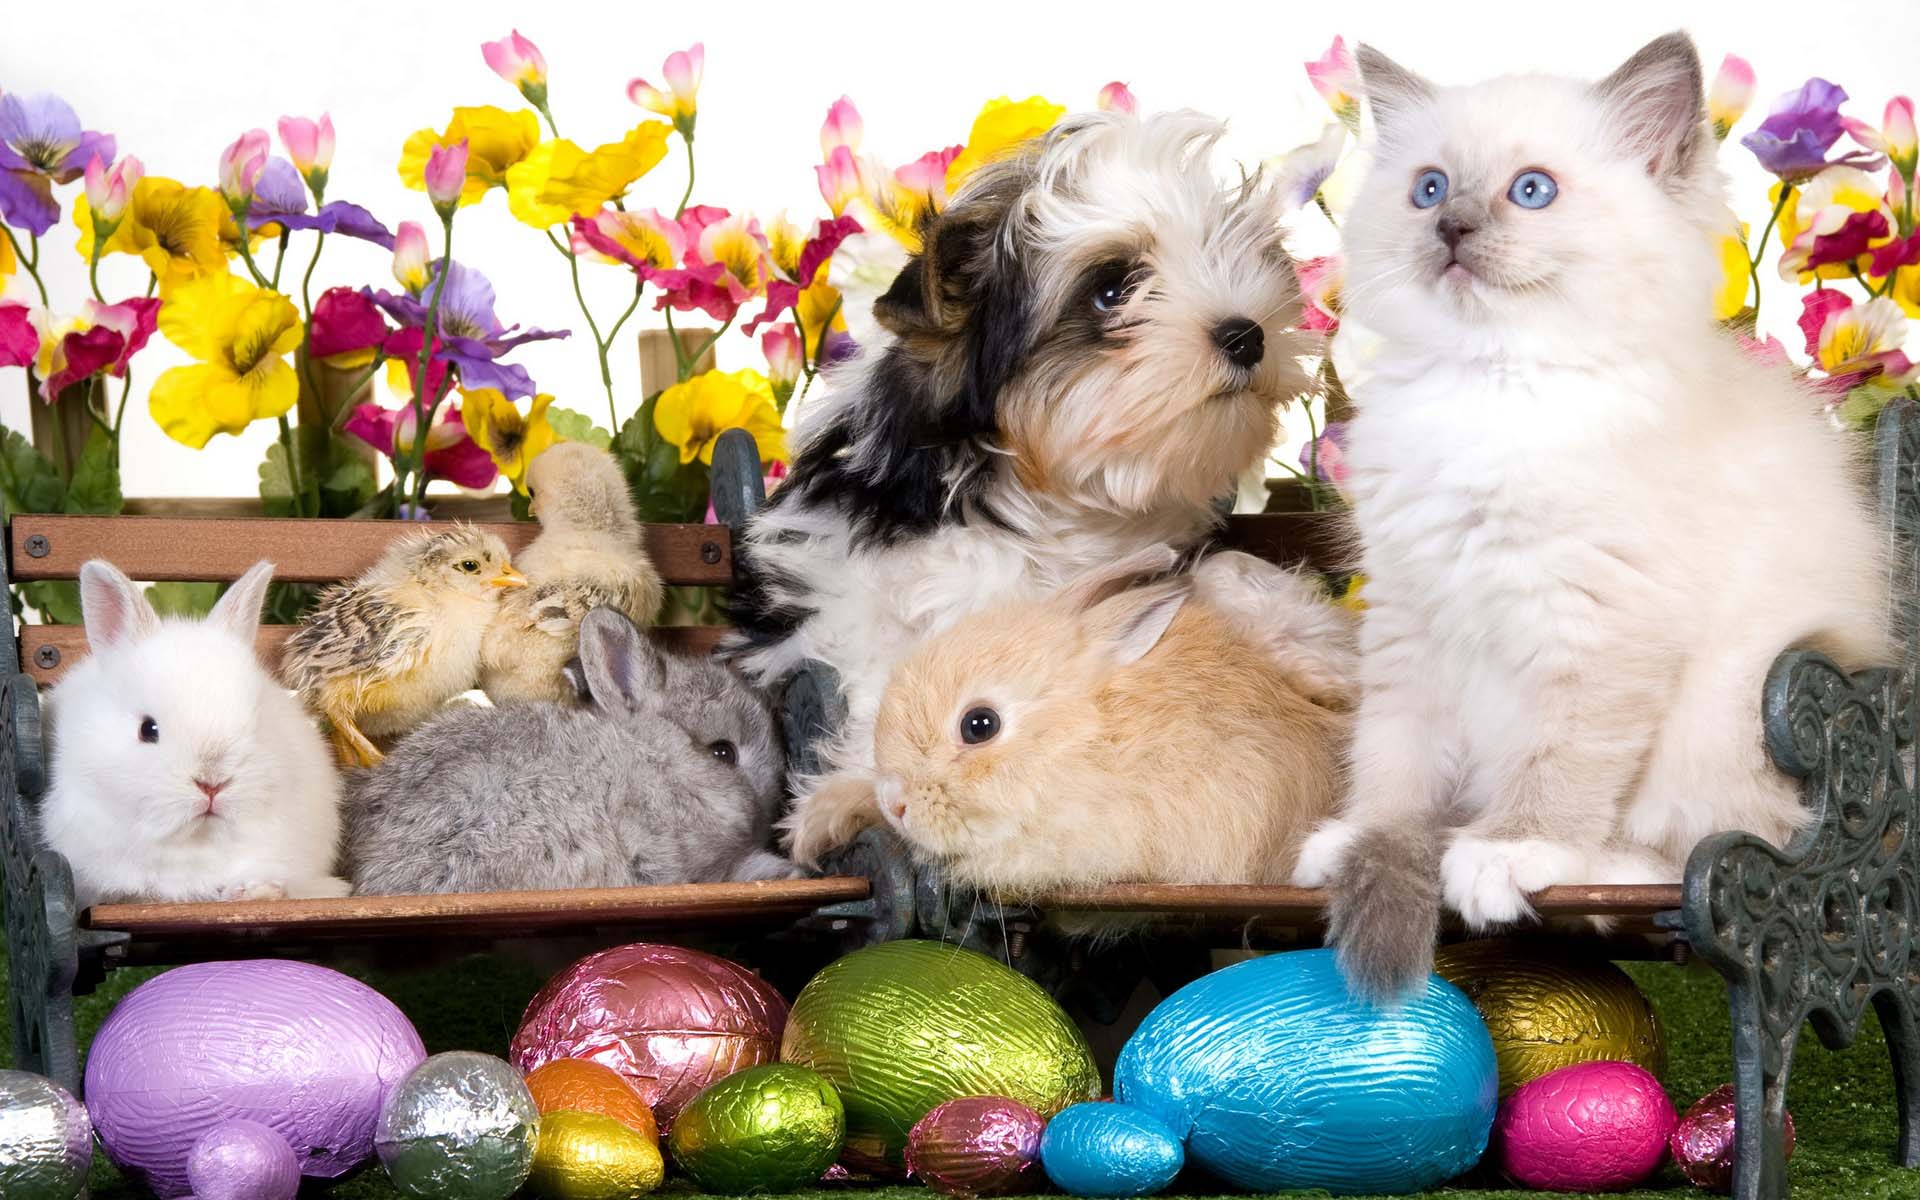 Hapy Easter Kitten Dog Puppy Rabbits Chickens Eggs Flowers